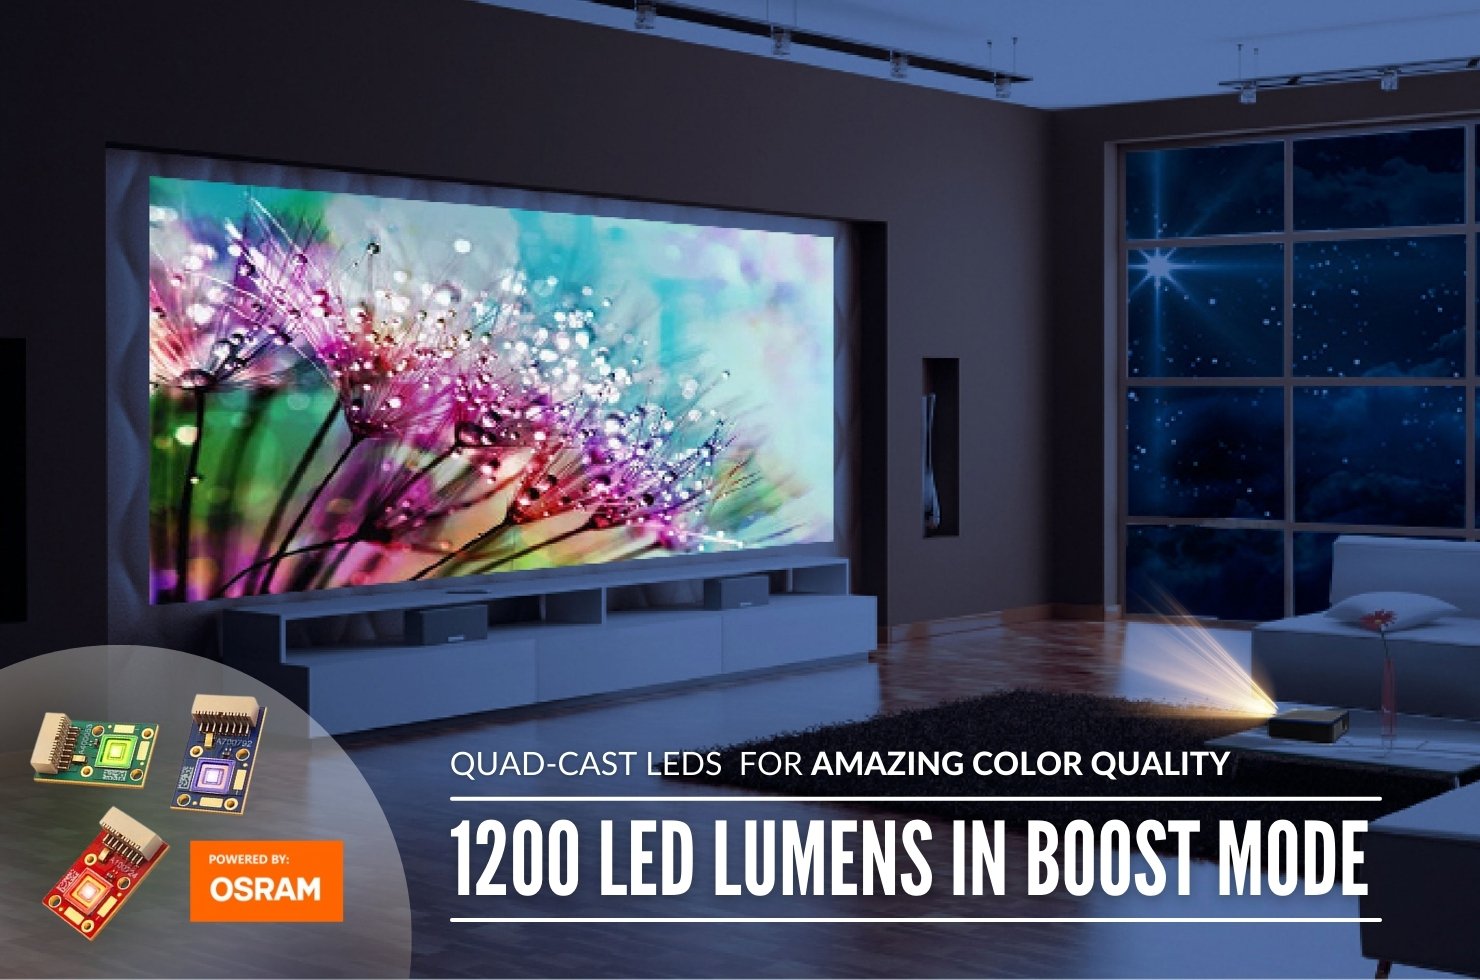 1200 LED Lumens in boost mode - M7 projecting flowers on the wall of a living room.